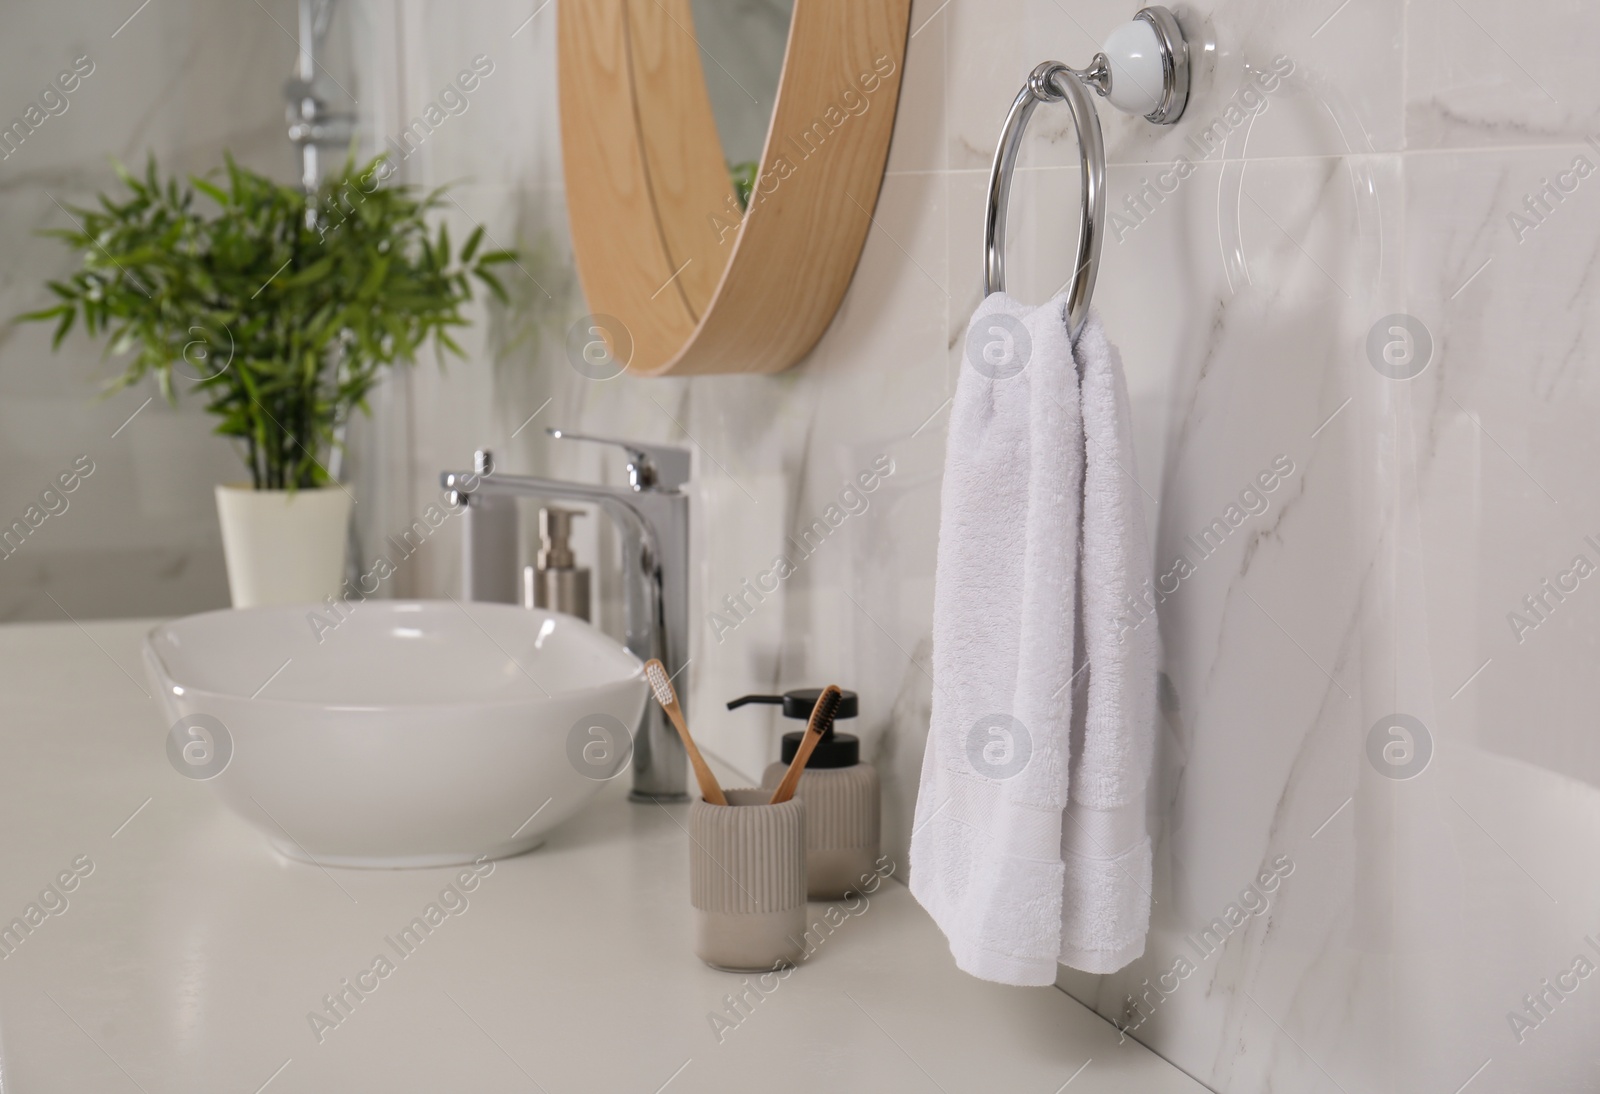 Photo of Soft towel on wall above bathroom countertop with toiletries